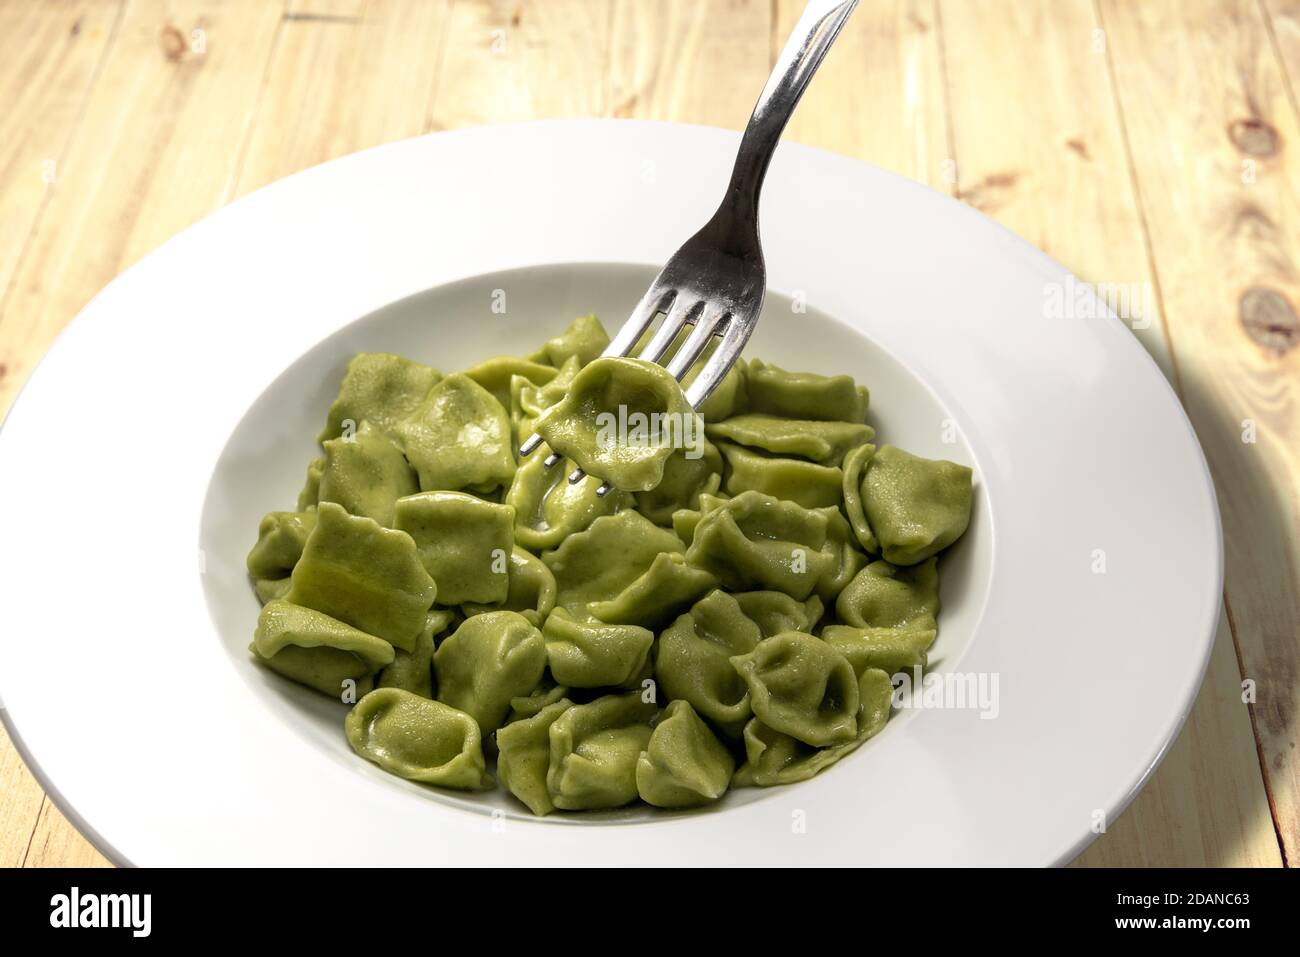 green ravioli del plin, pasta from the langhe italy, made with egg pasta and spinach vegetables with fork raising a ravioli on rustic wooden backgroun Stock Photo